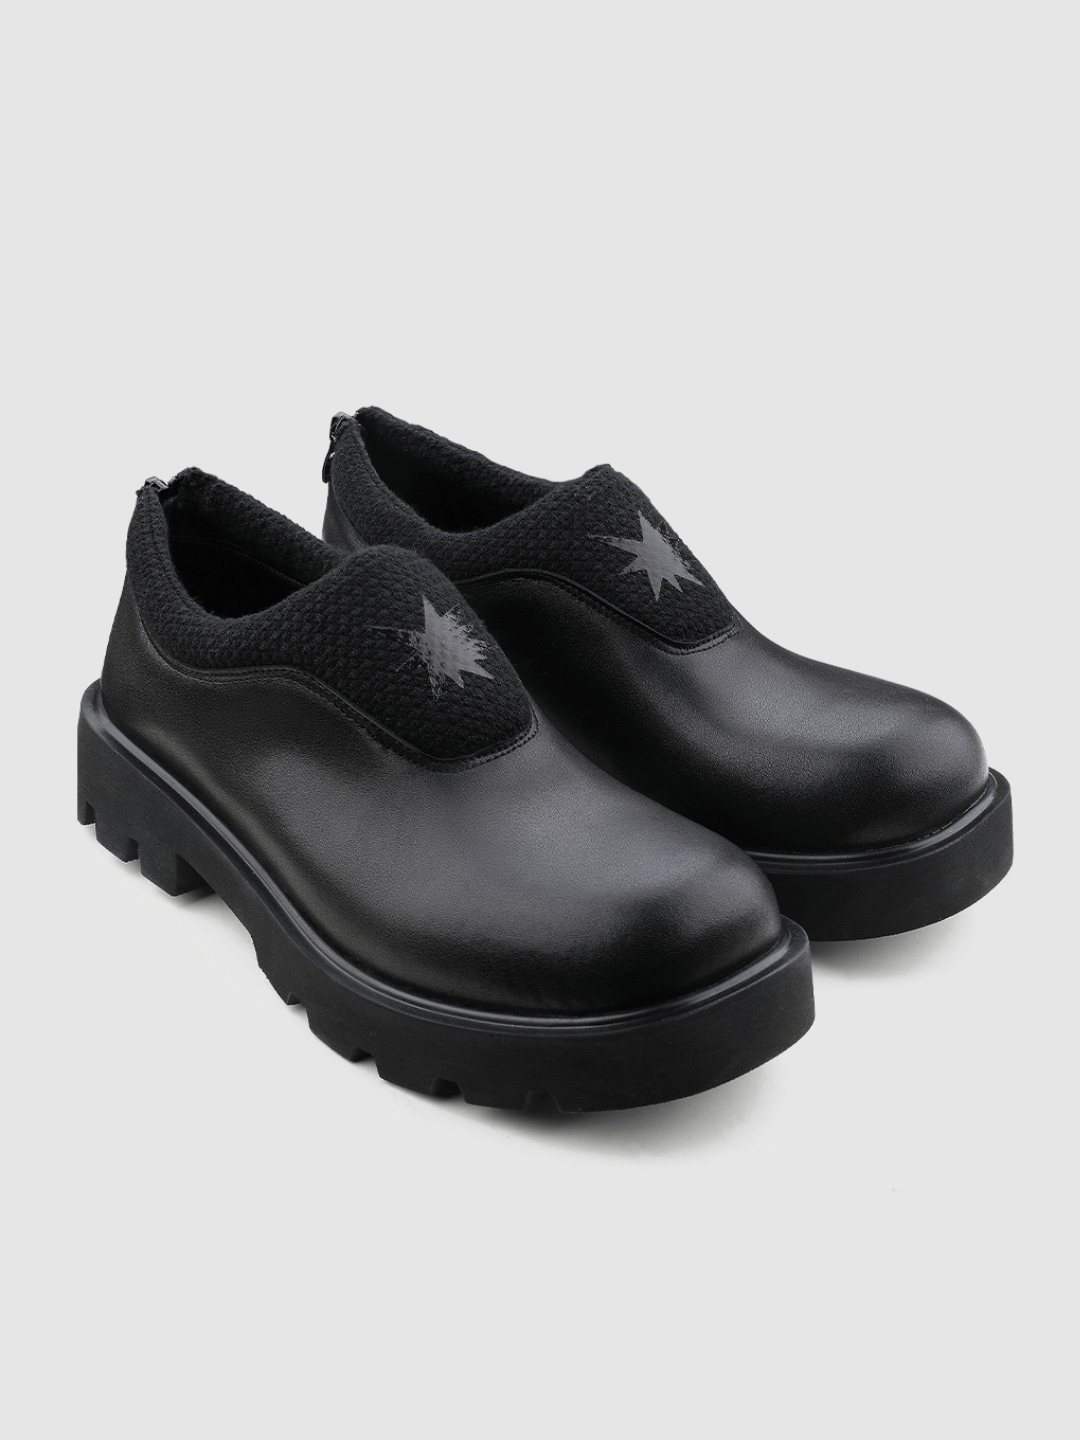 black casual leather shoes na883